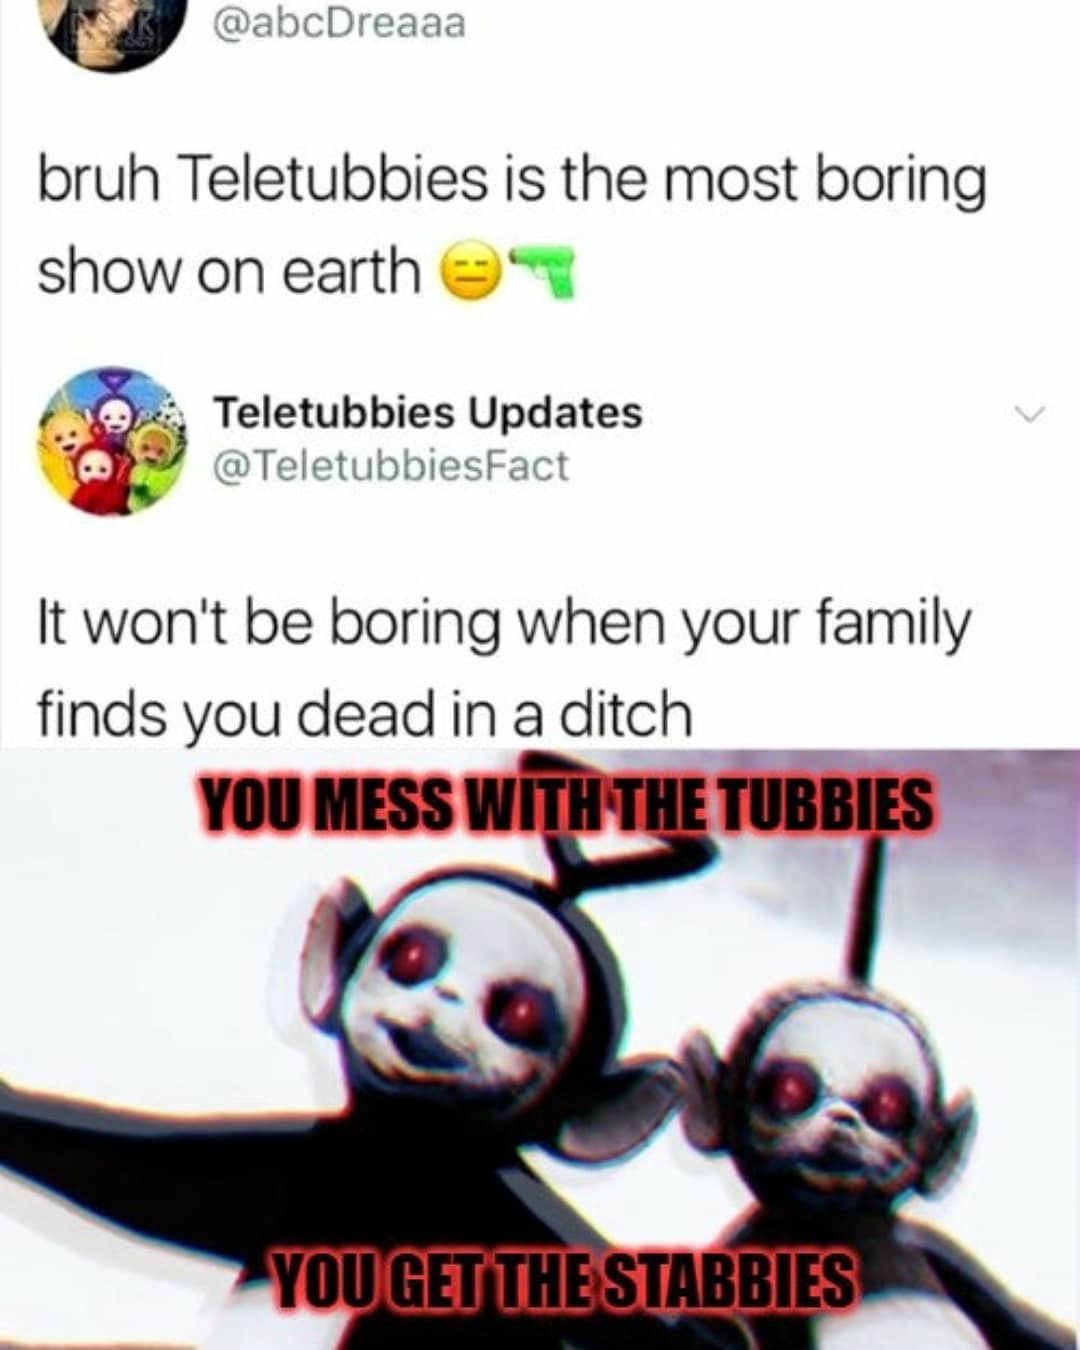 dank memes - teletubbies update - bruh Teletubbies is the most boring show on earth Teletubbies Updates It won't be boring when your family finds you dead in a ditch You Mess With The Tubbies You Get The Stabbies